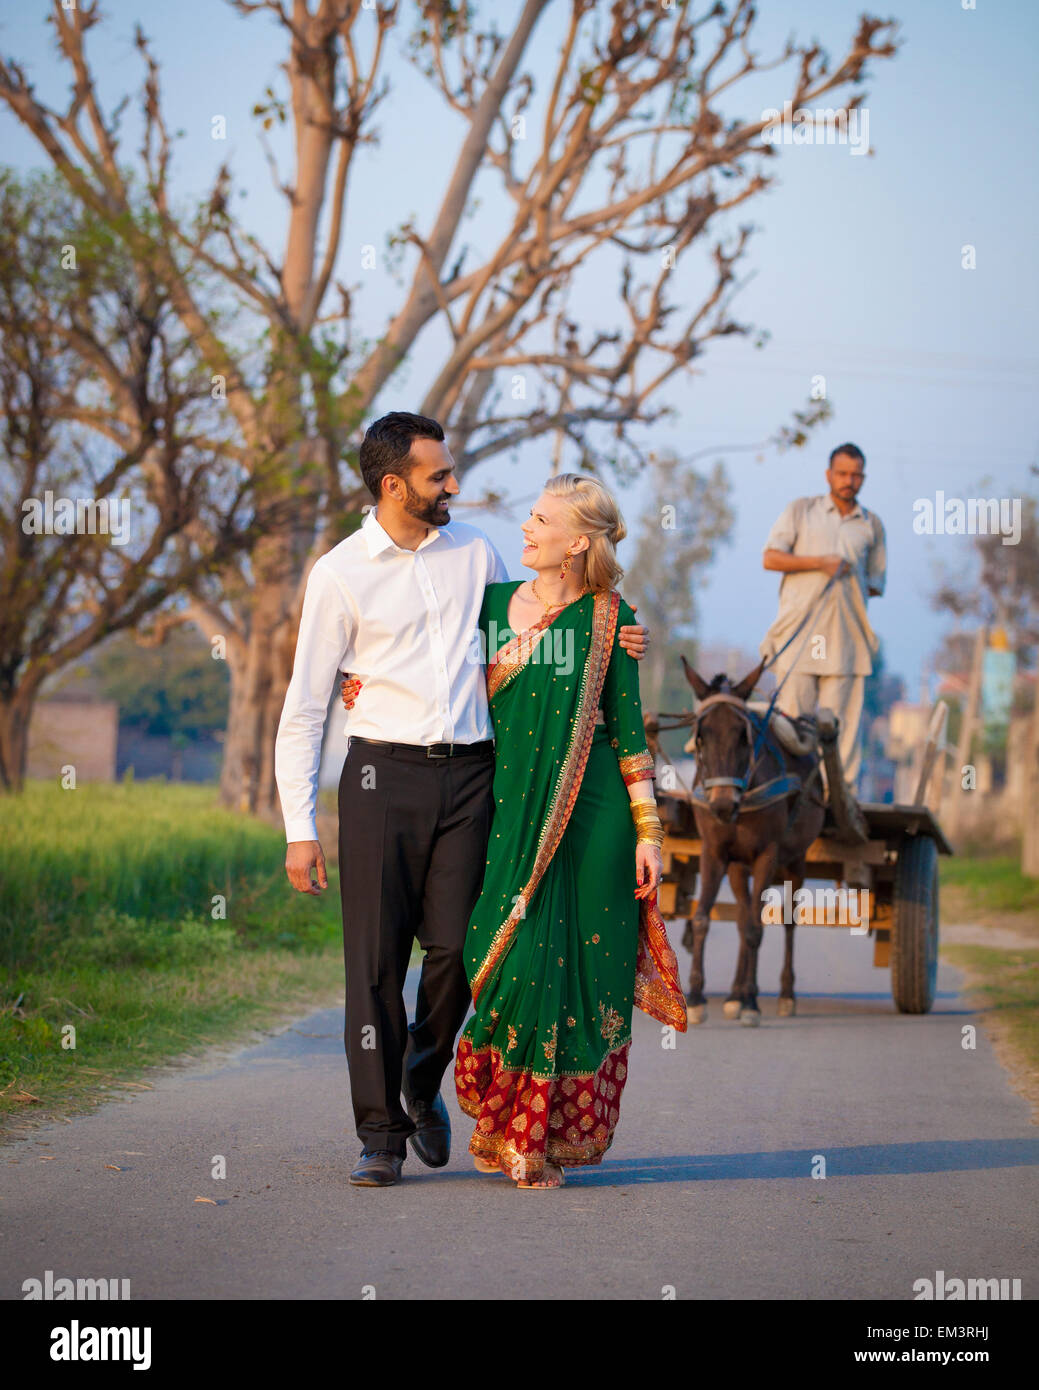 A Mixed Race Couple Walking In An Embrace Down A Path; Ludhiana, Punjab, India Stock Photo